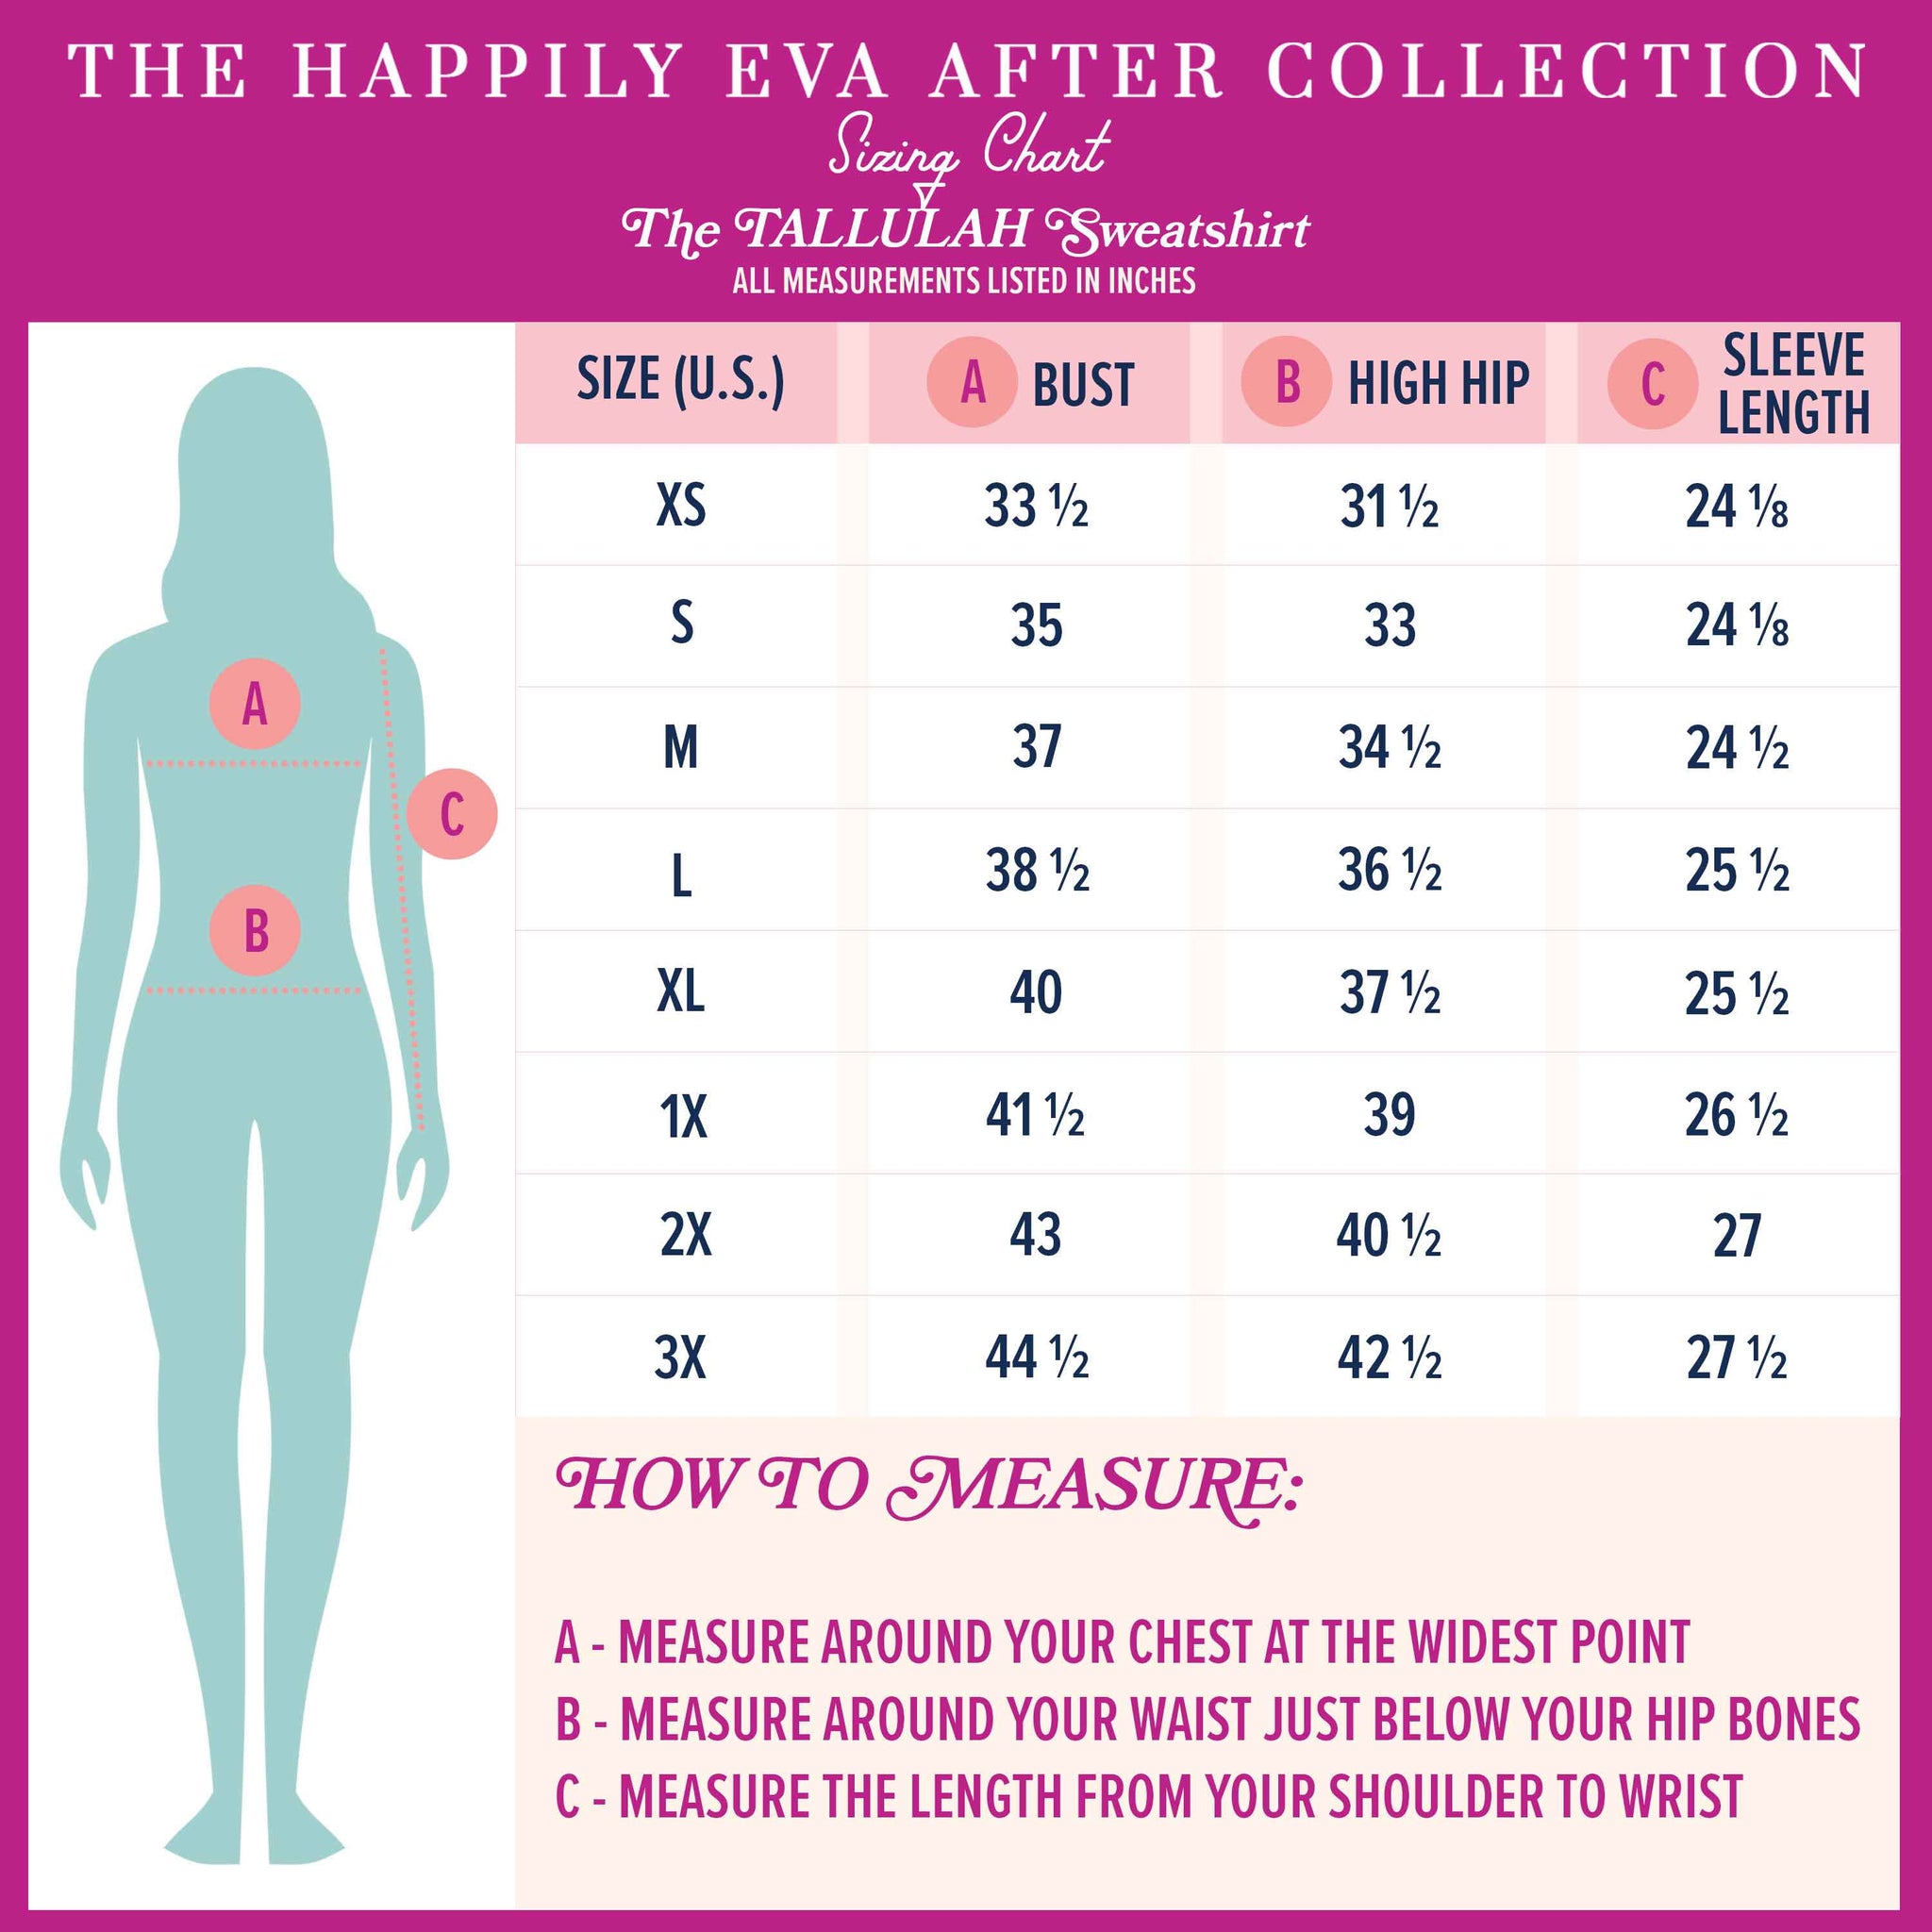 The Happily Eva After Collection Tallulah Sweatpants Sizing Chart